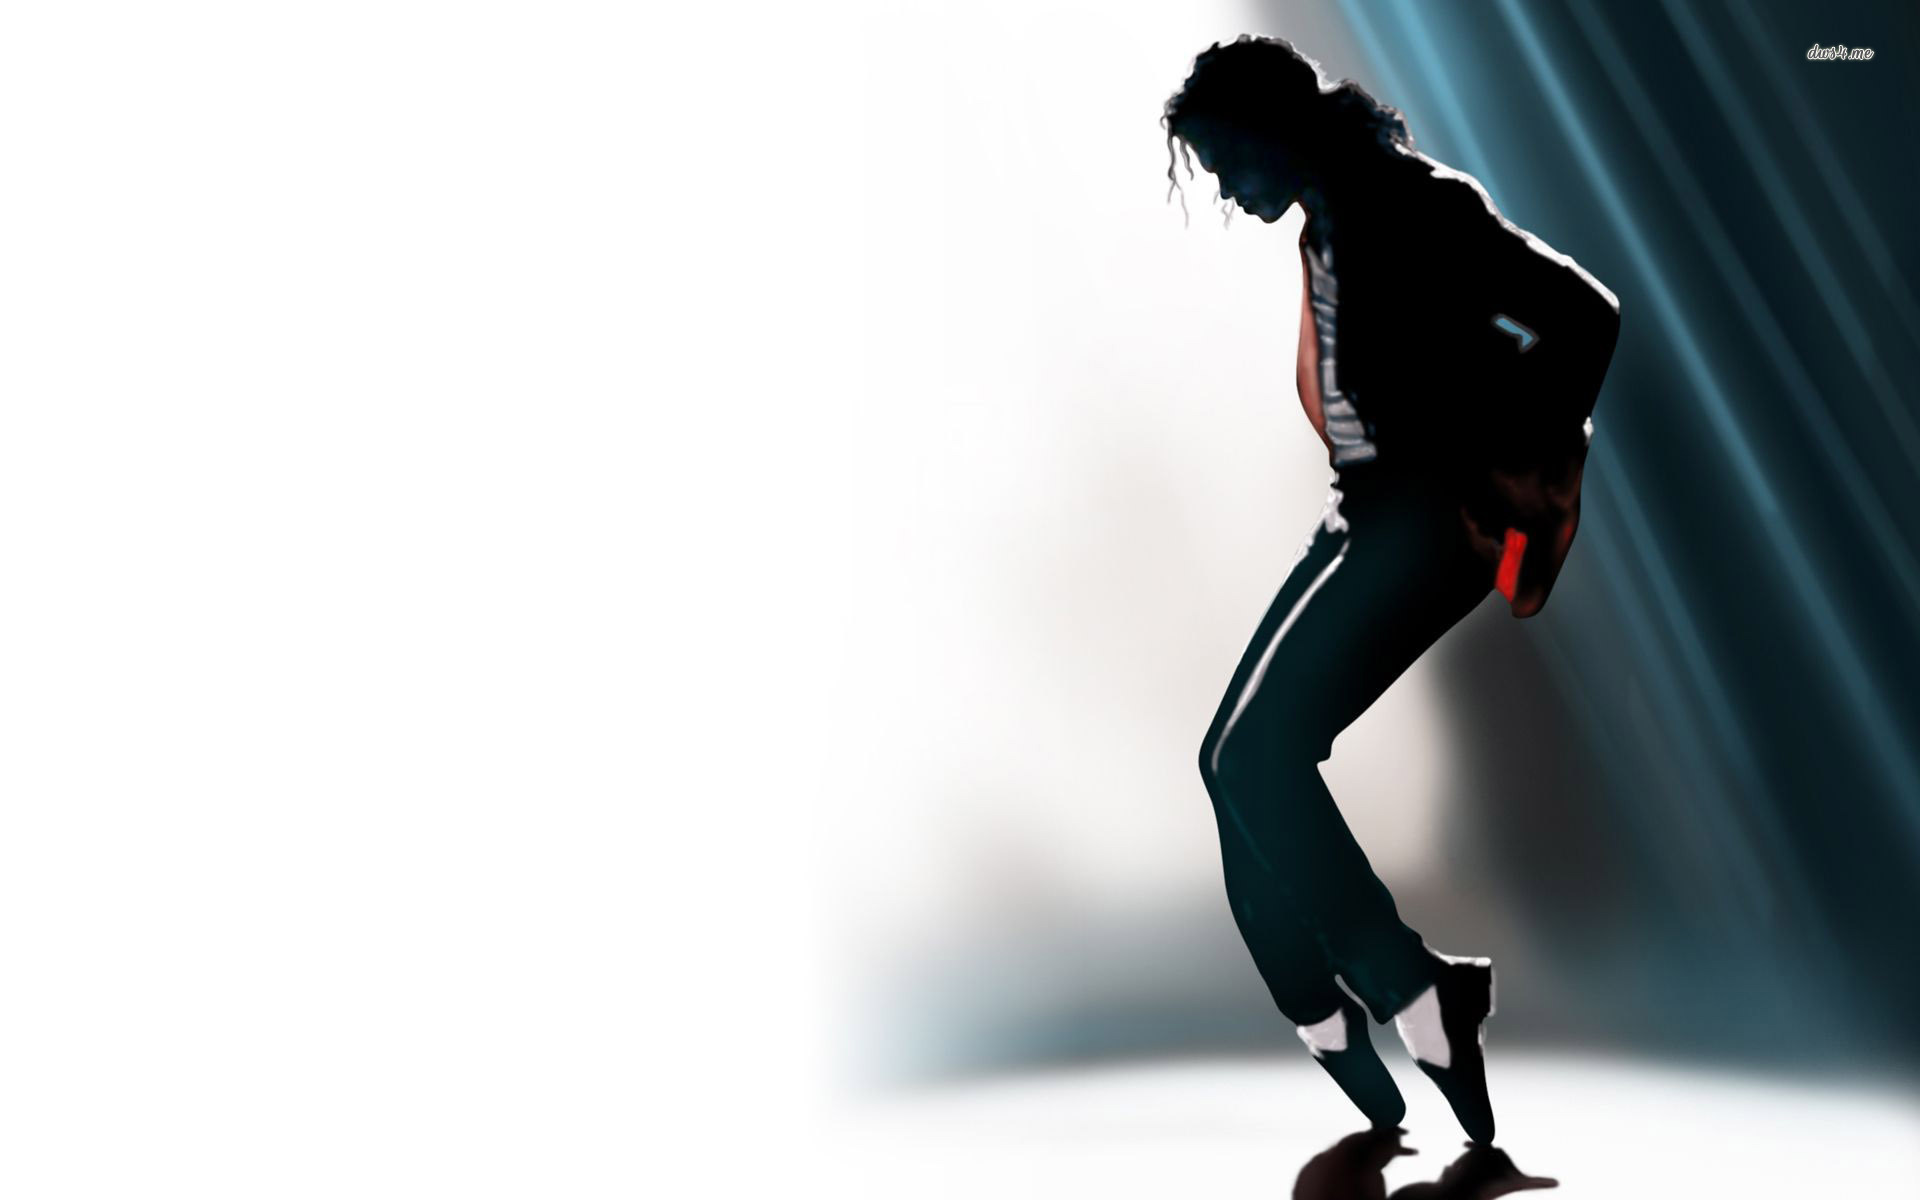 Michael Jackson Wallpapers High Resolution and Quality